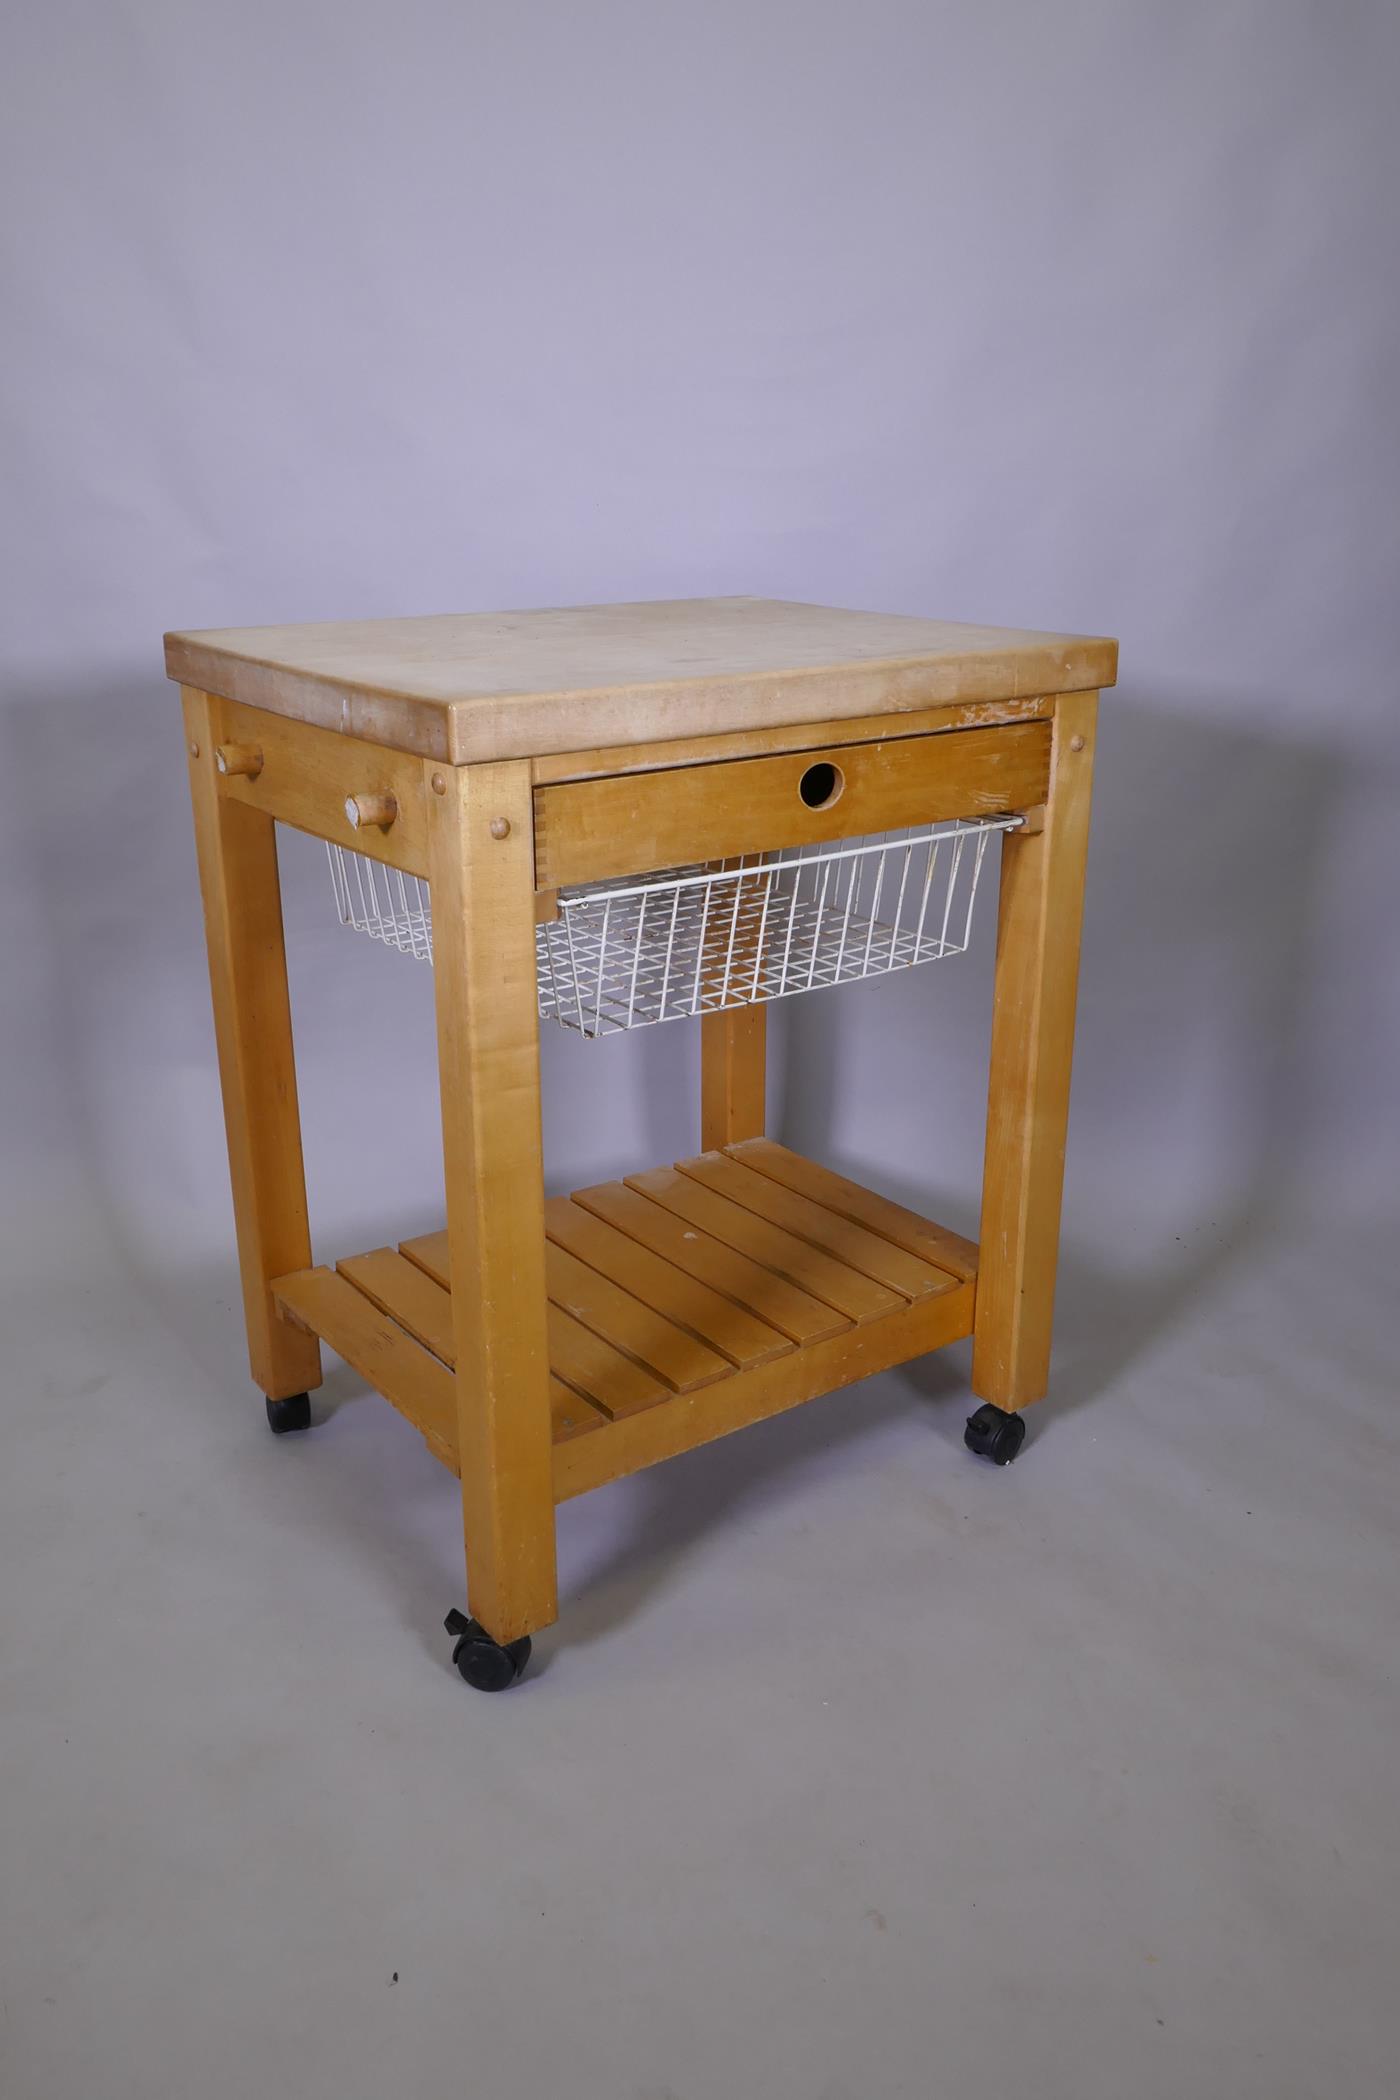 A beech wood kitchen island with chopping block top, single drawer and pull out basket and slatted